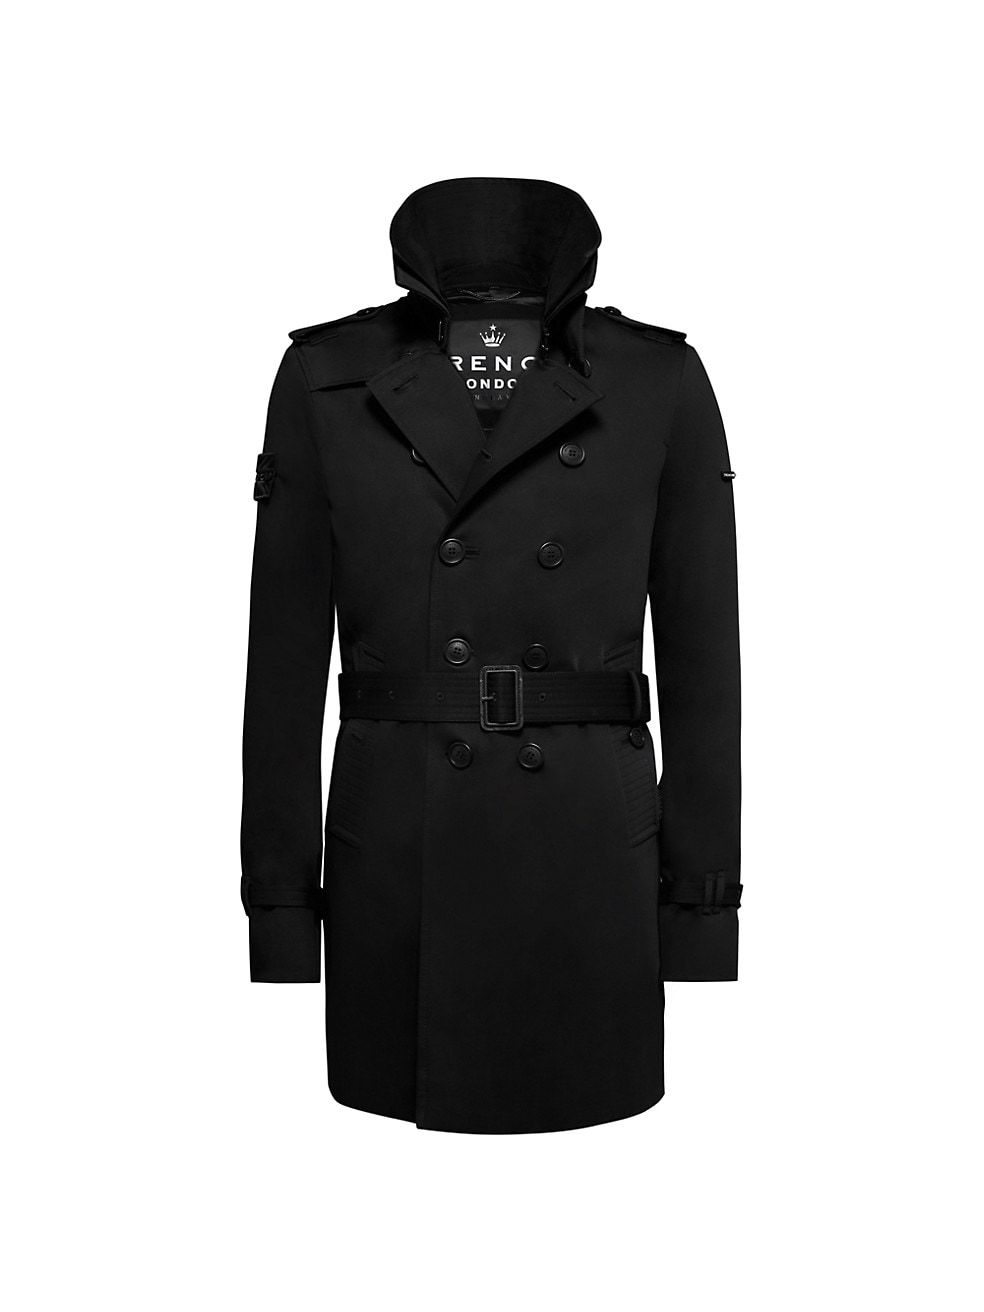 Best Types of Coats and Jackets for Men 2022